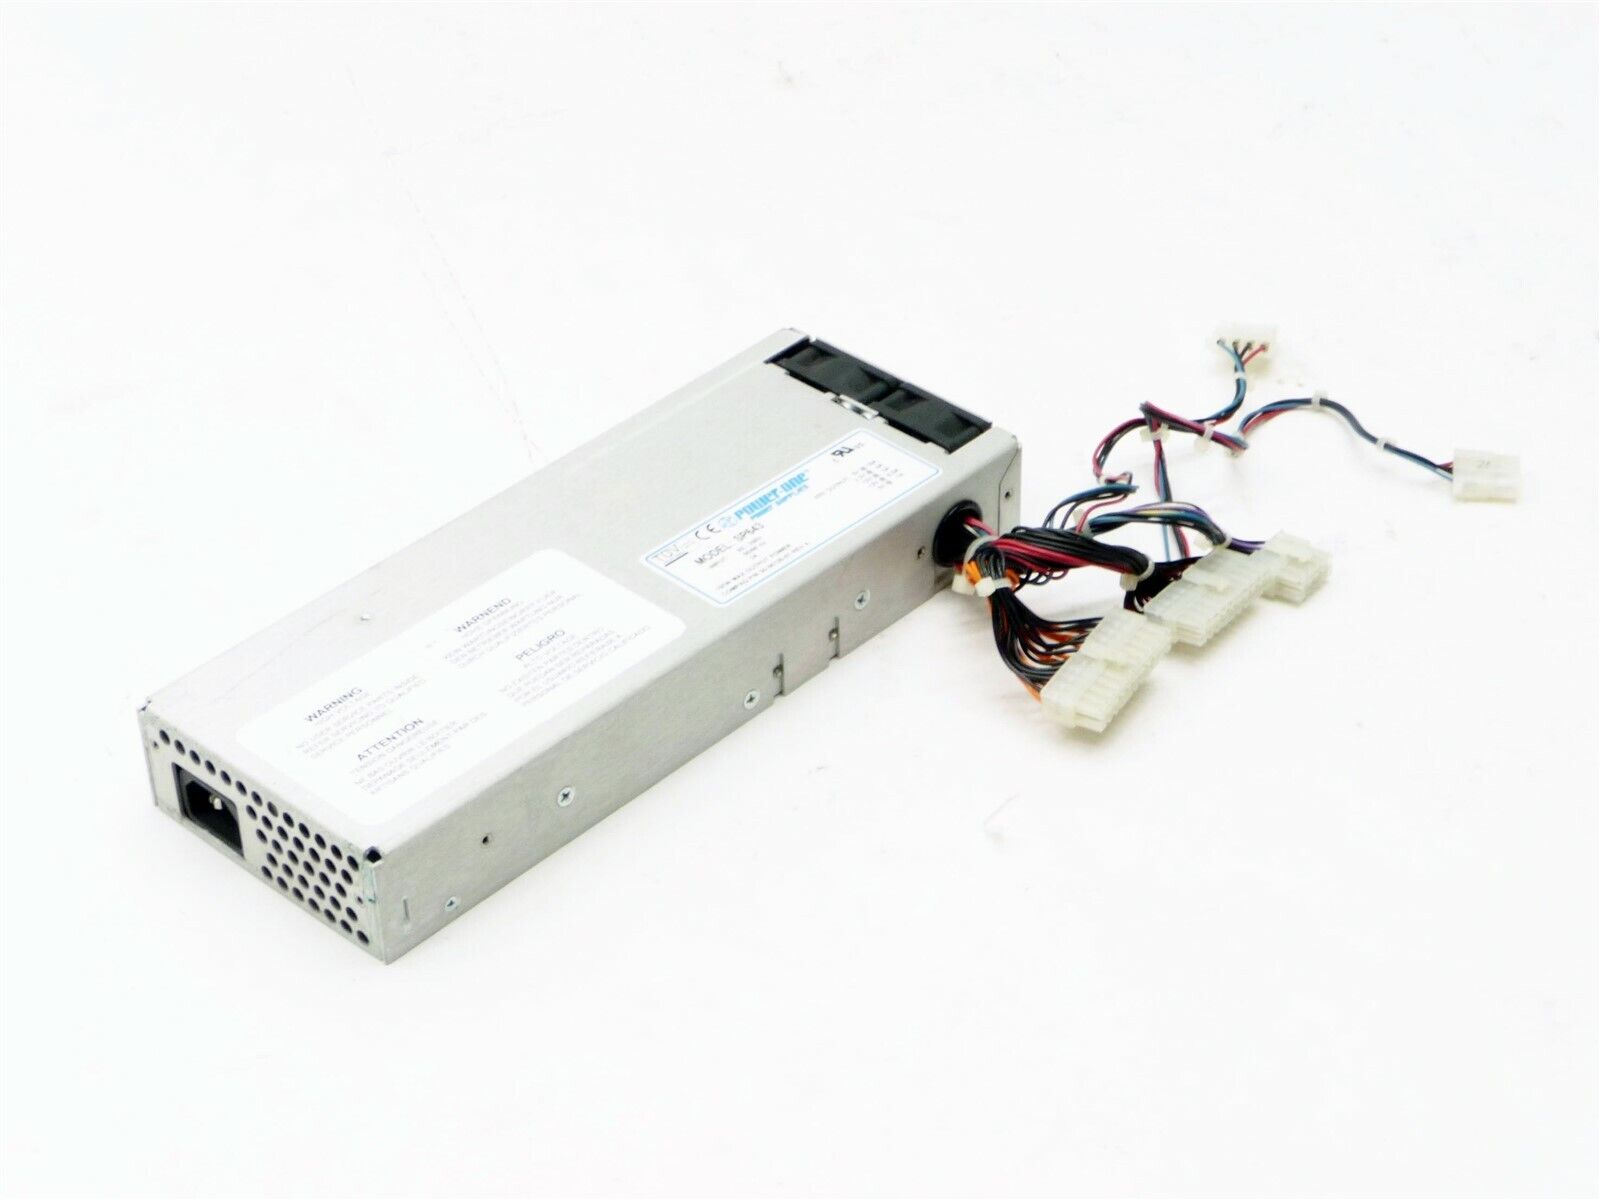 POWER-ONE SP643 150W POWER SUPPLY 30-56126-01 FOR HP COMPAQ ALPHASERVER DS10L